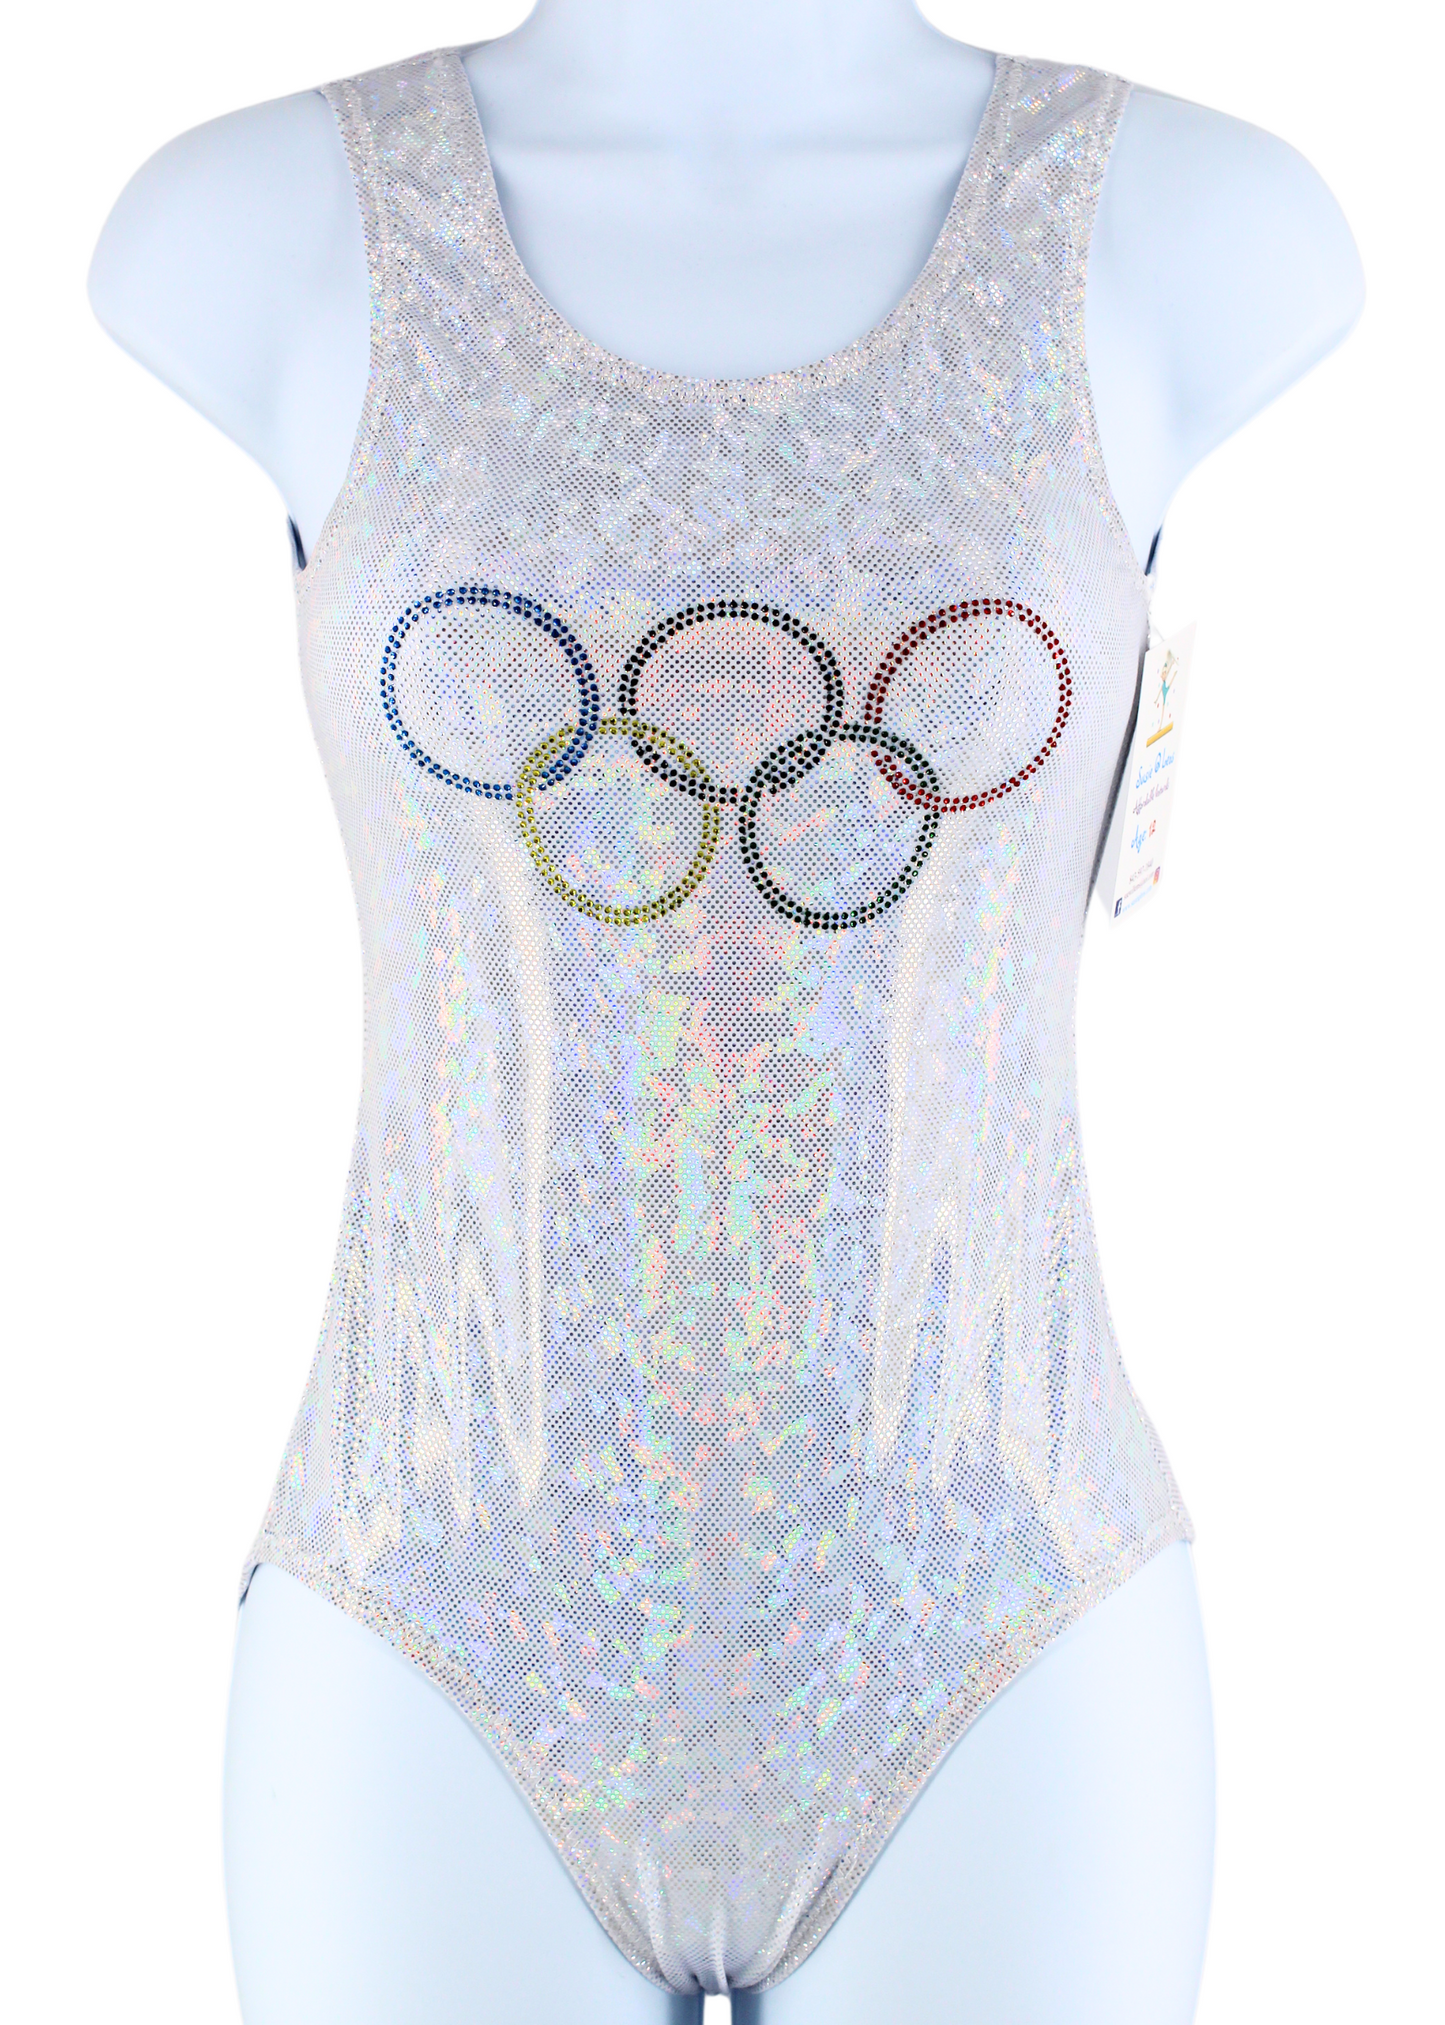 Olympic Shattered Silver